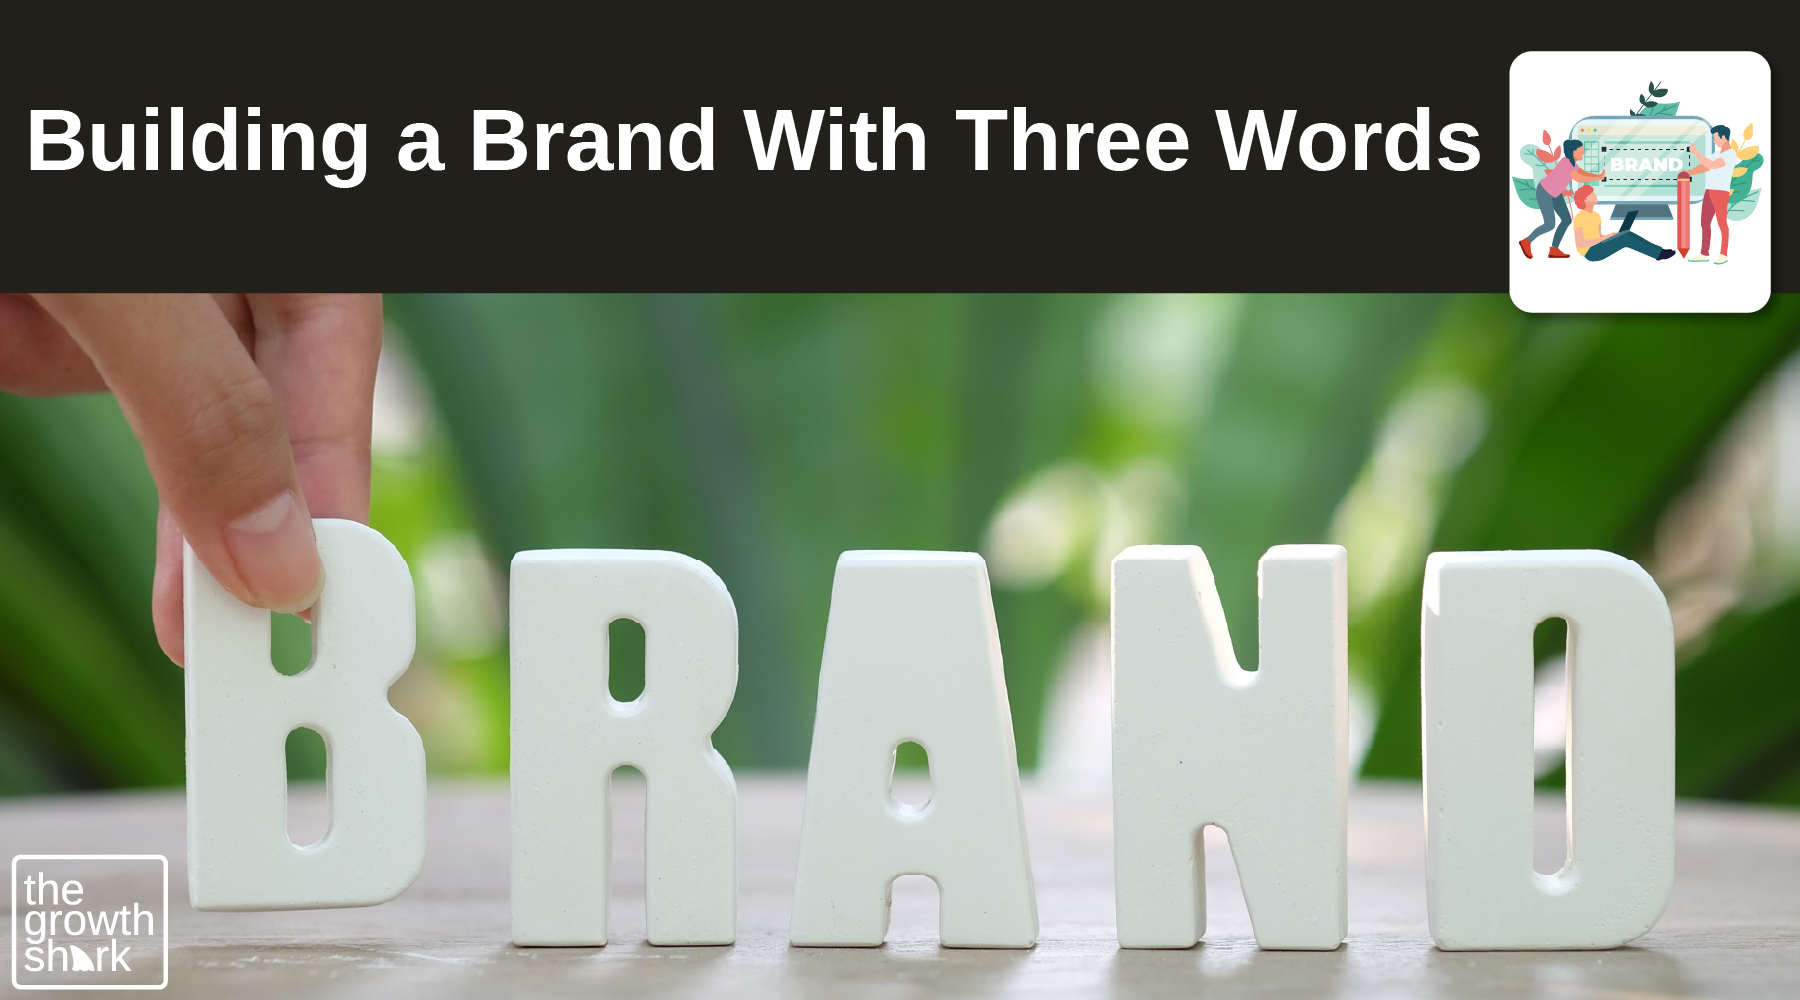 Building a brand can start with choosing three words to define your business